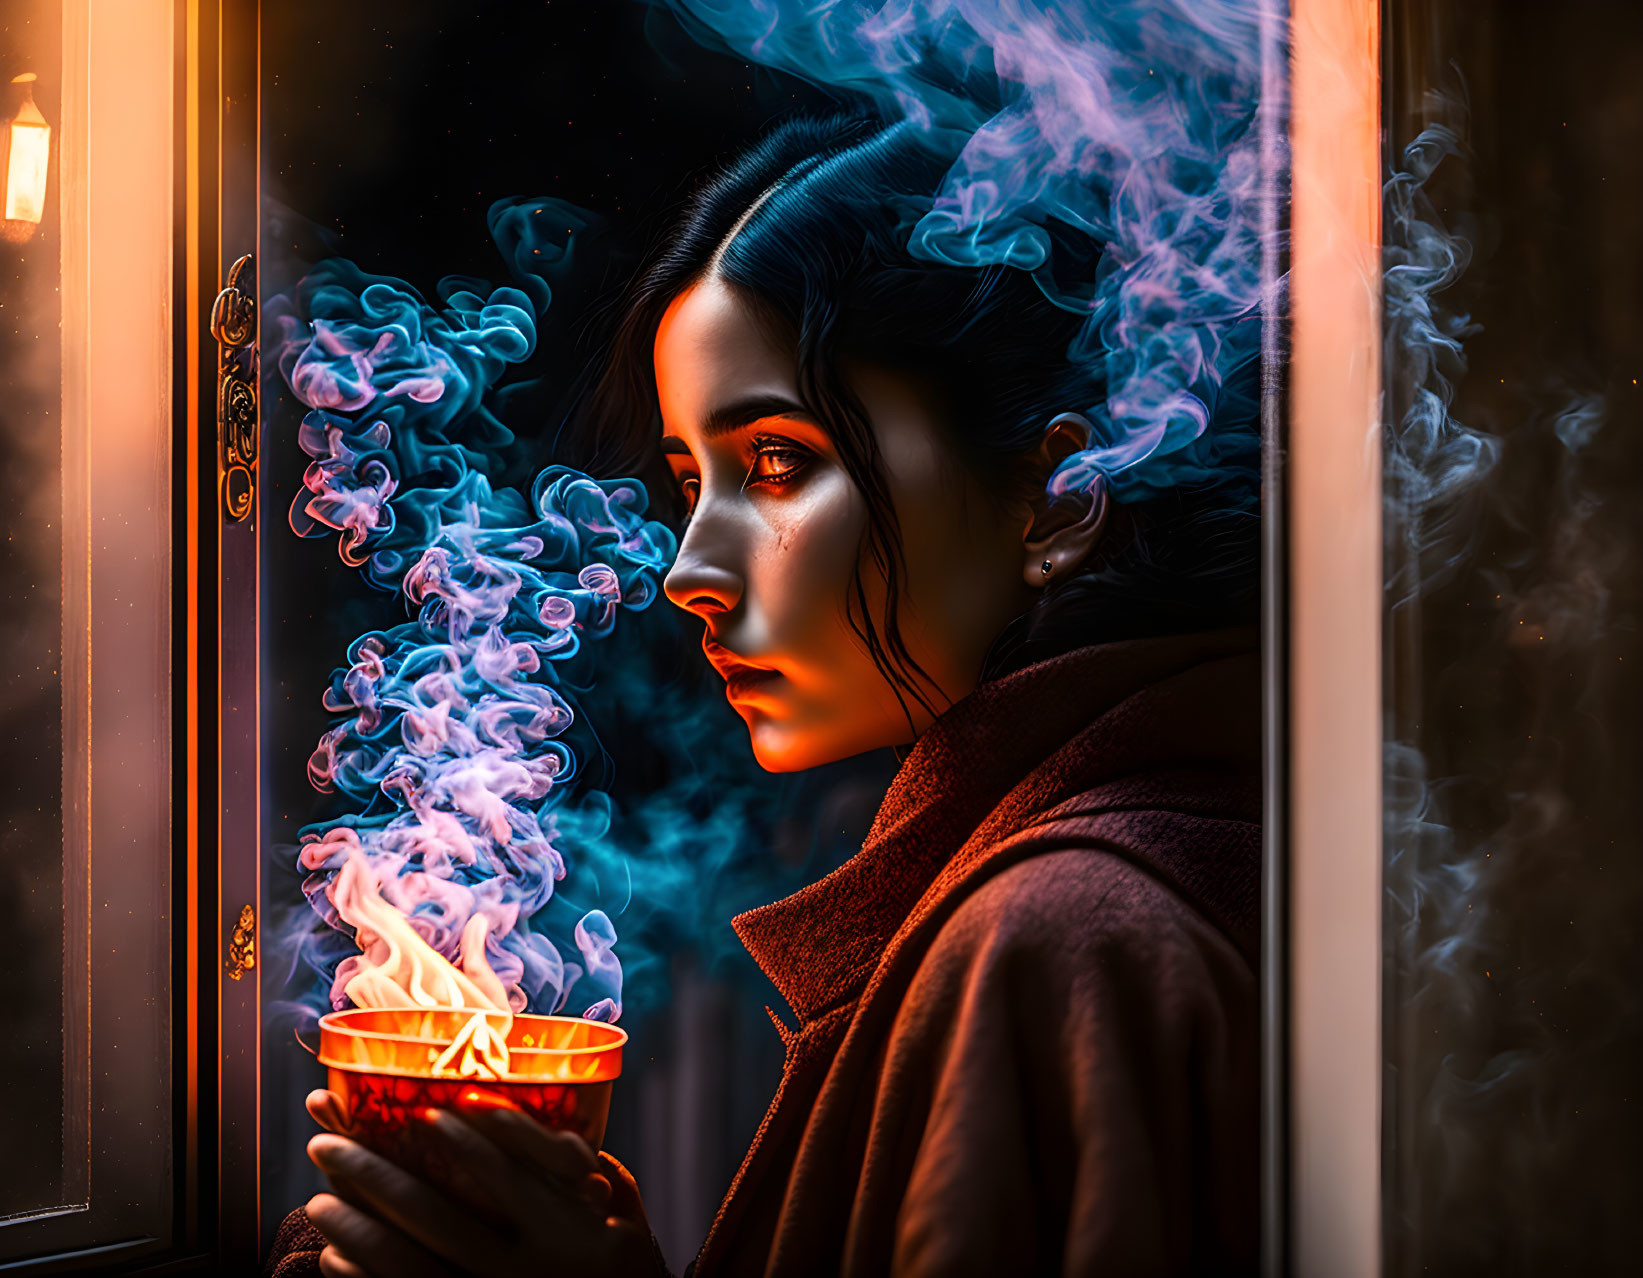 Woman holding steaming cup gazes out window at night in surreal scene